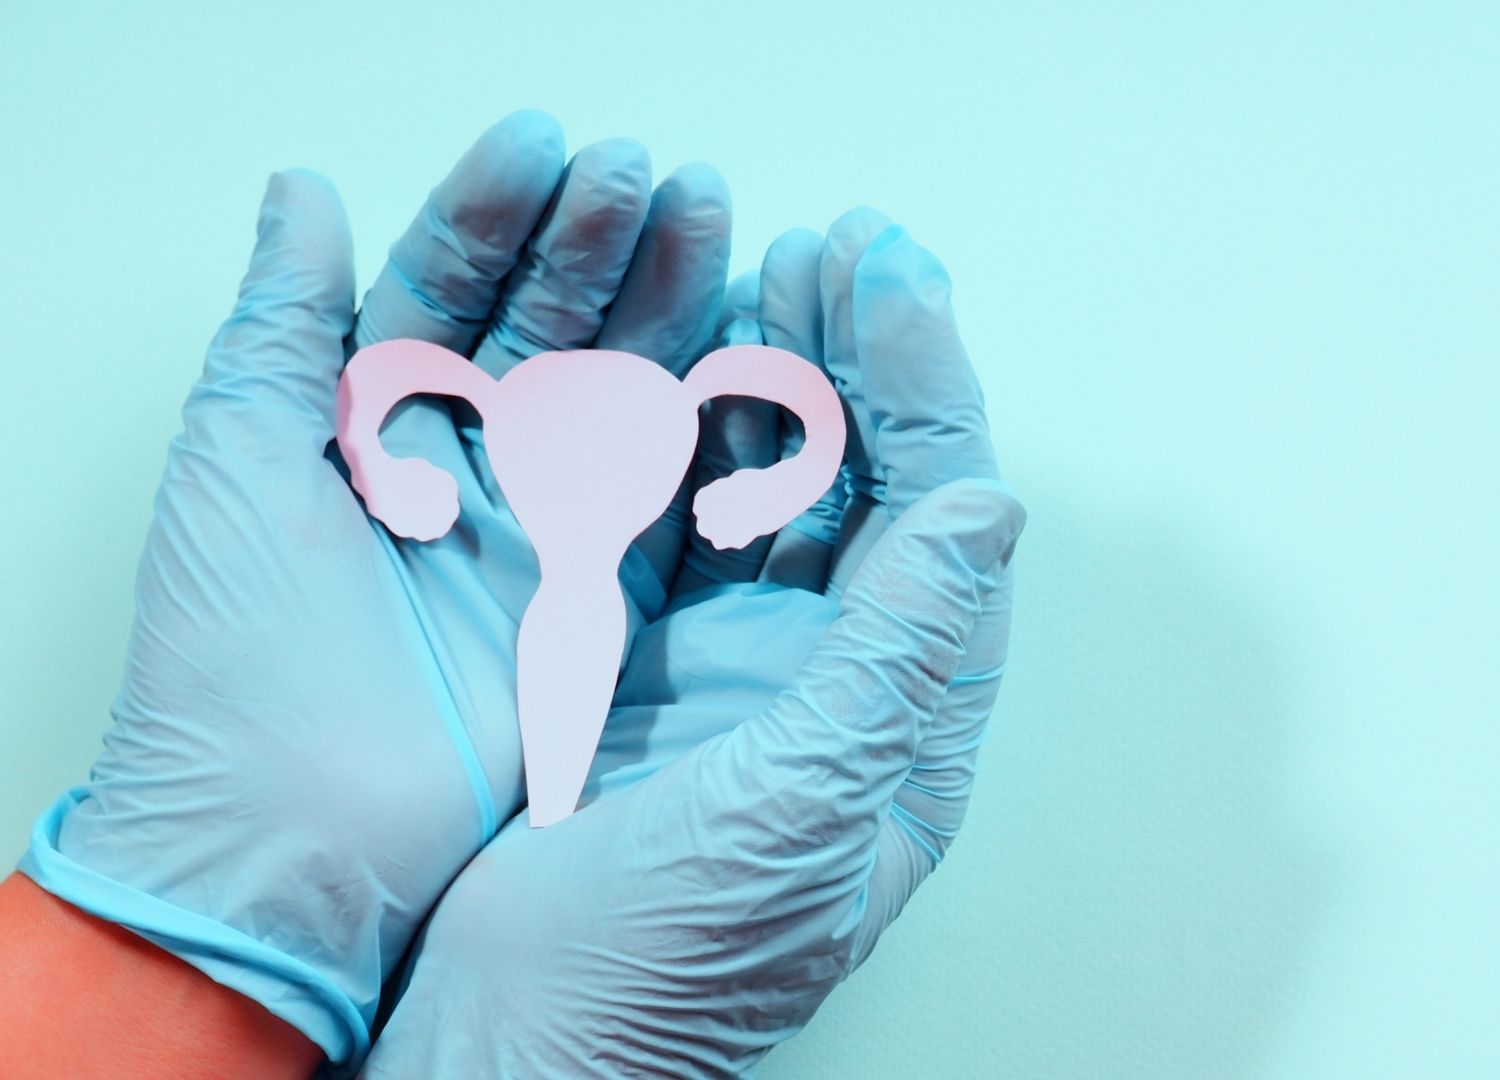 Ovarian Cyst: All You Need to Know